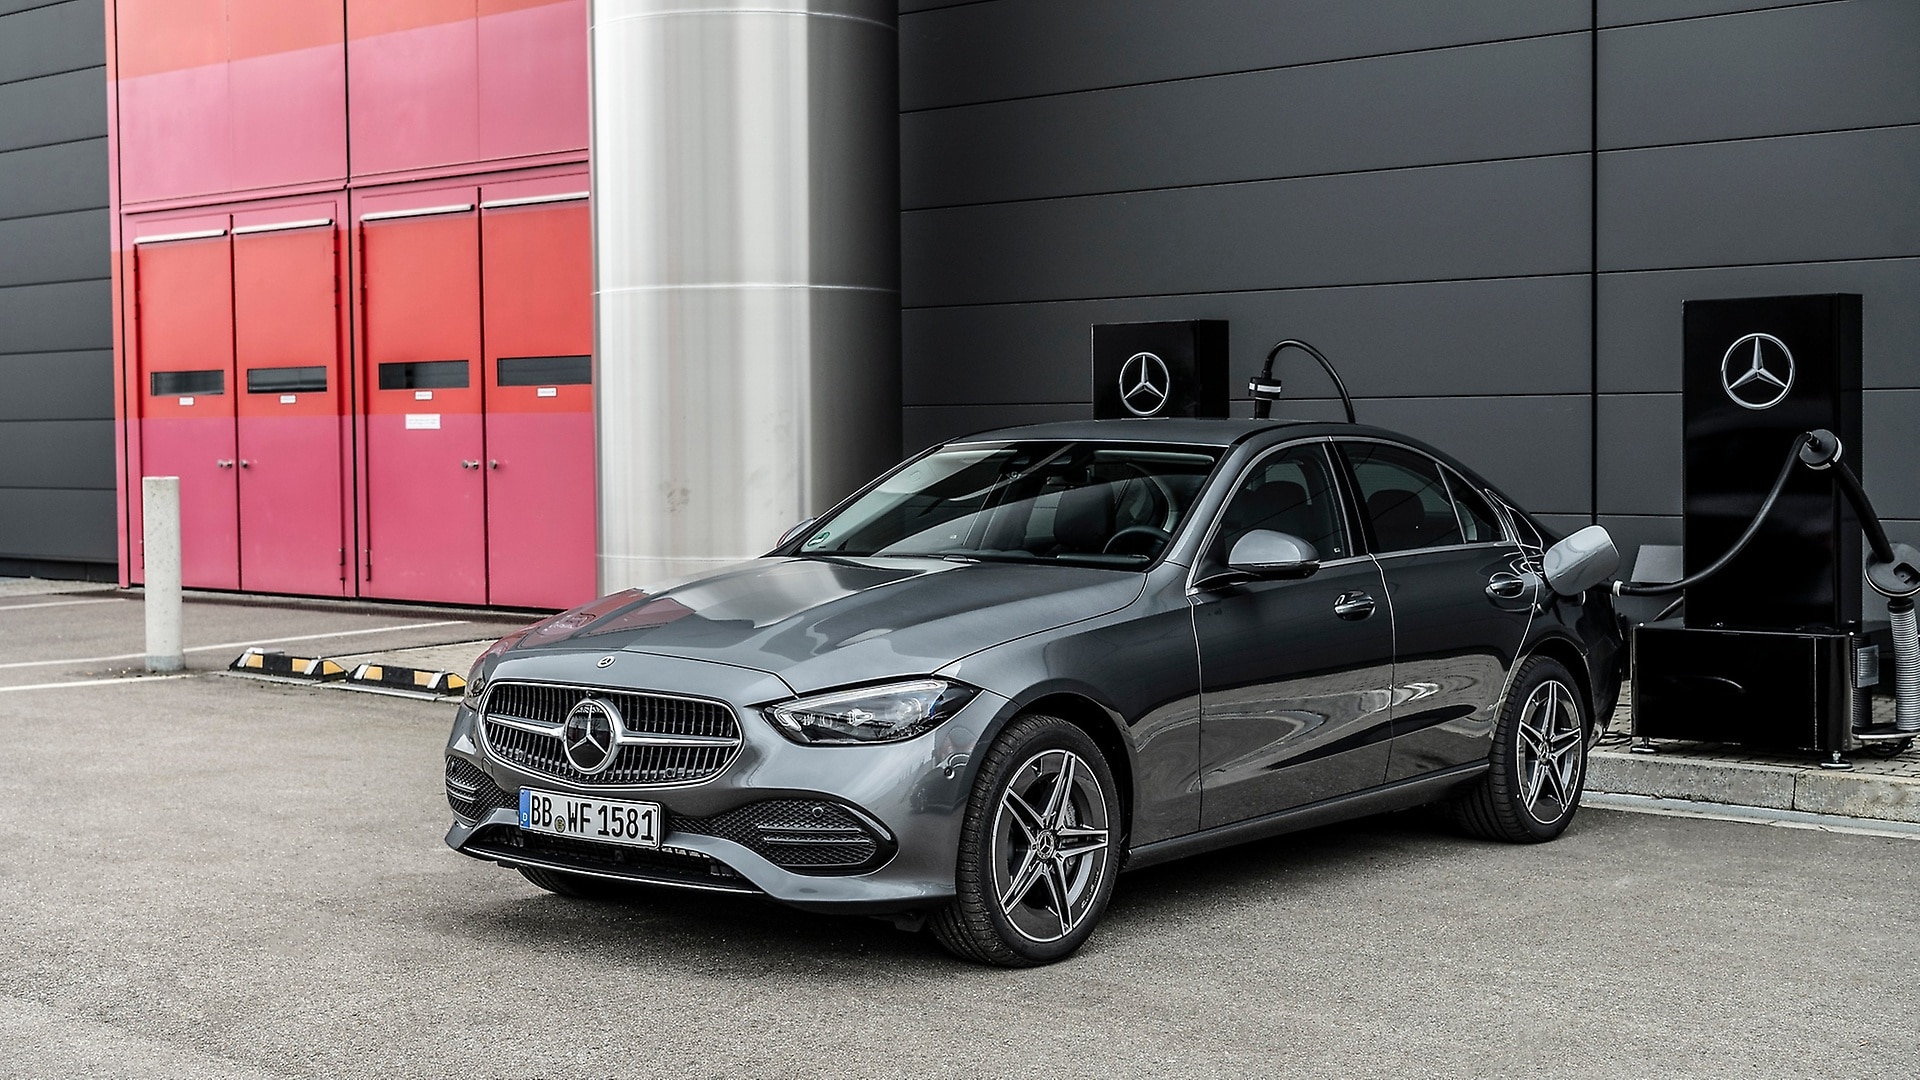 Electrification of the new Mercedes-Benz C-Class